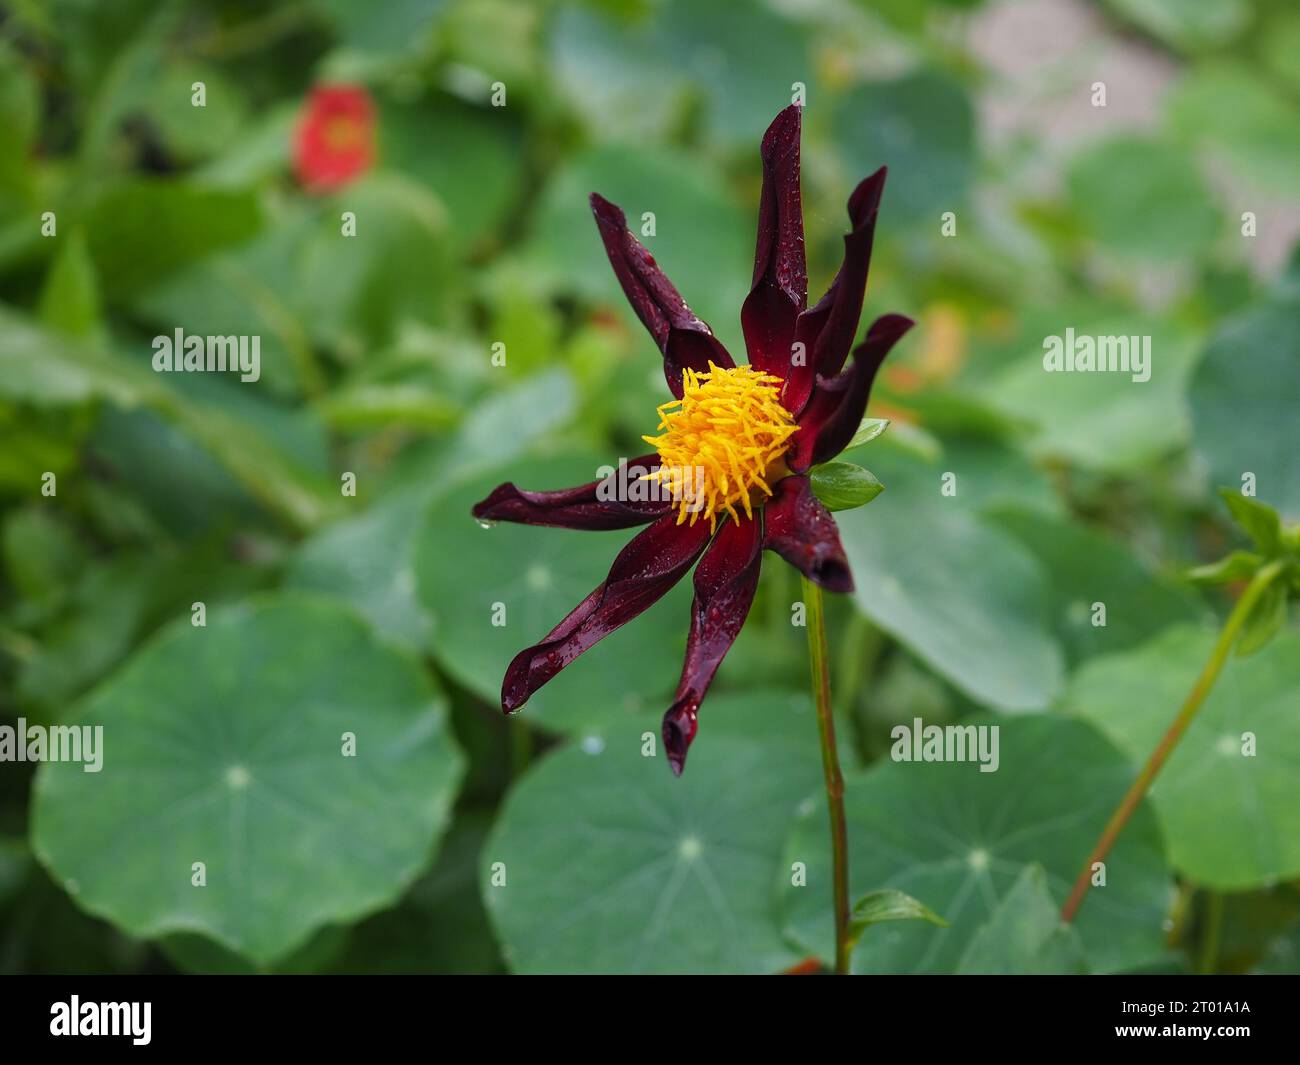 Close up of a Honka black dahlia 'Verrone's Obsidian' flower with dark cartwheel petals growing in a garden in late summer / early autumn in Britain Stock Photo